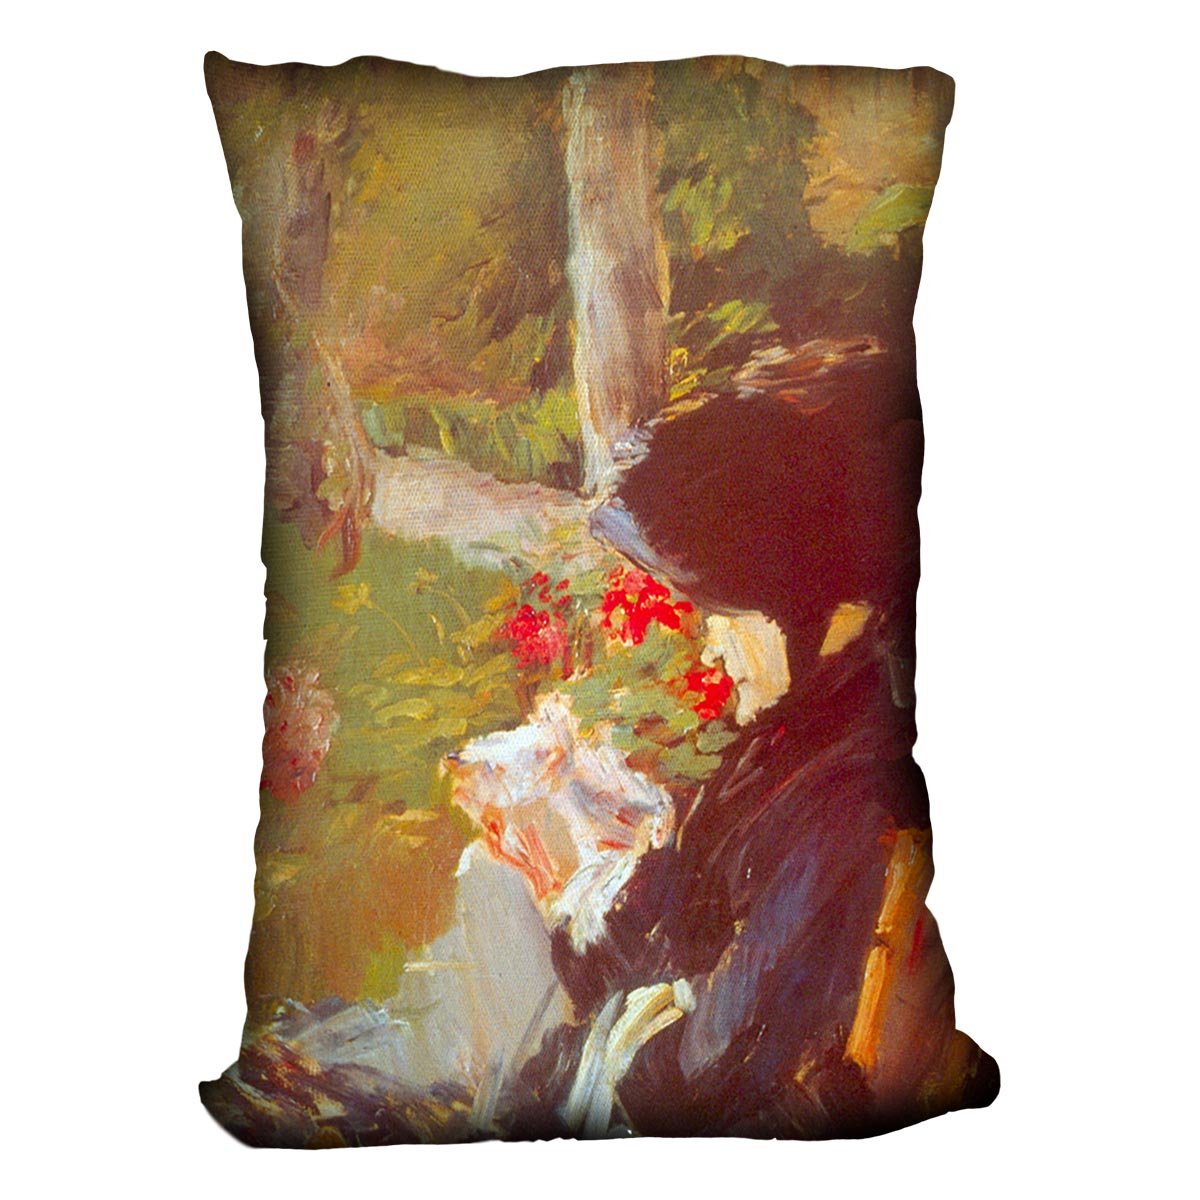 Manets Mother by Manet Throw Pillow